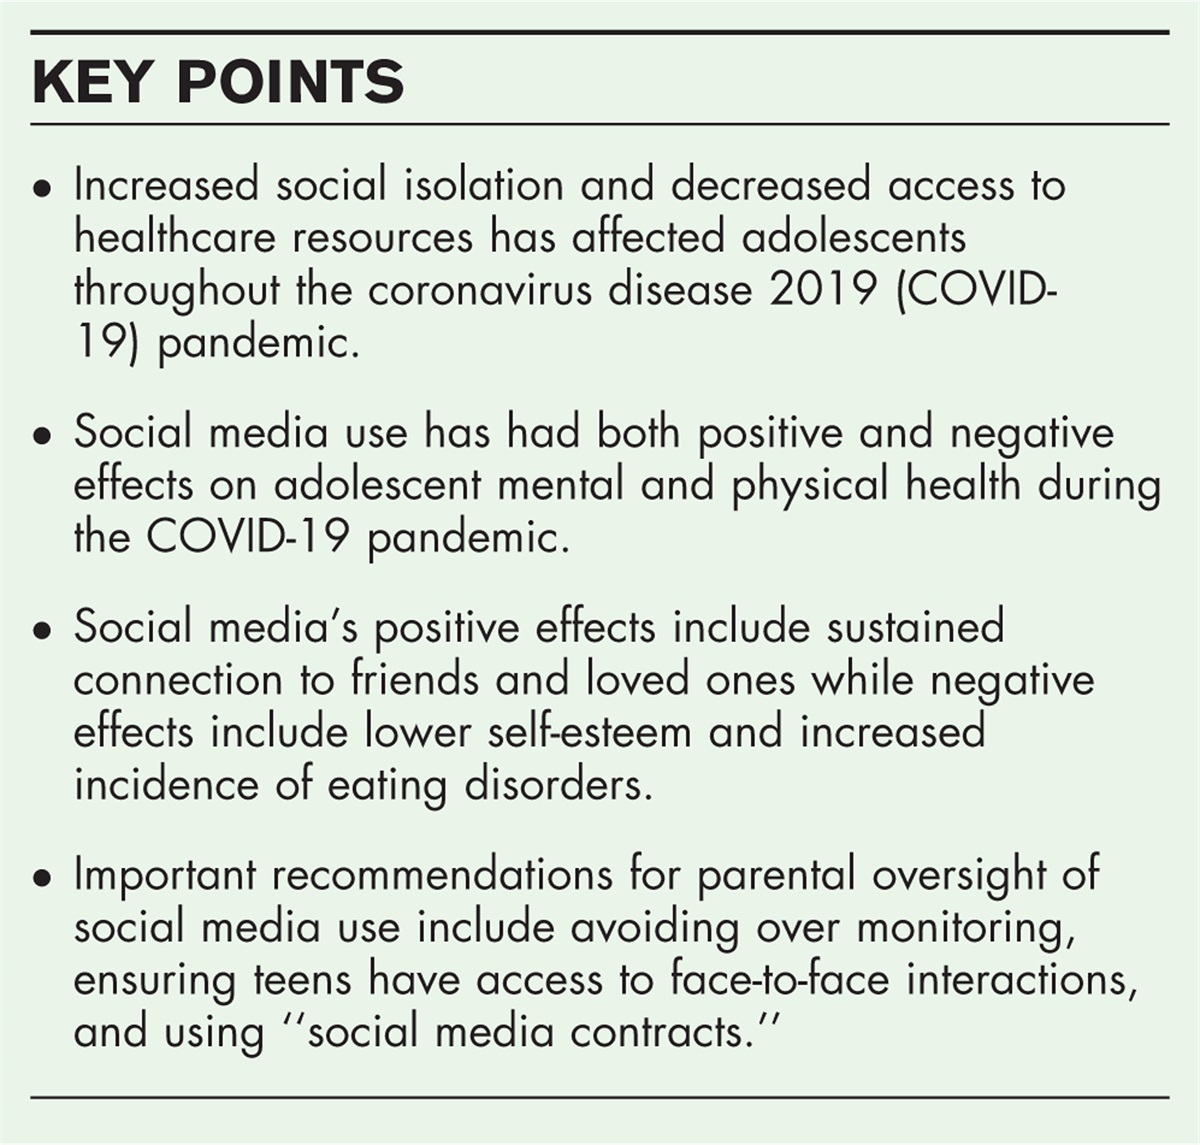 Impact of COVID-19 on adolescent health and use of social media